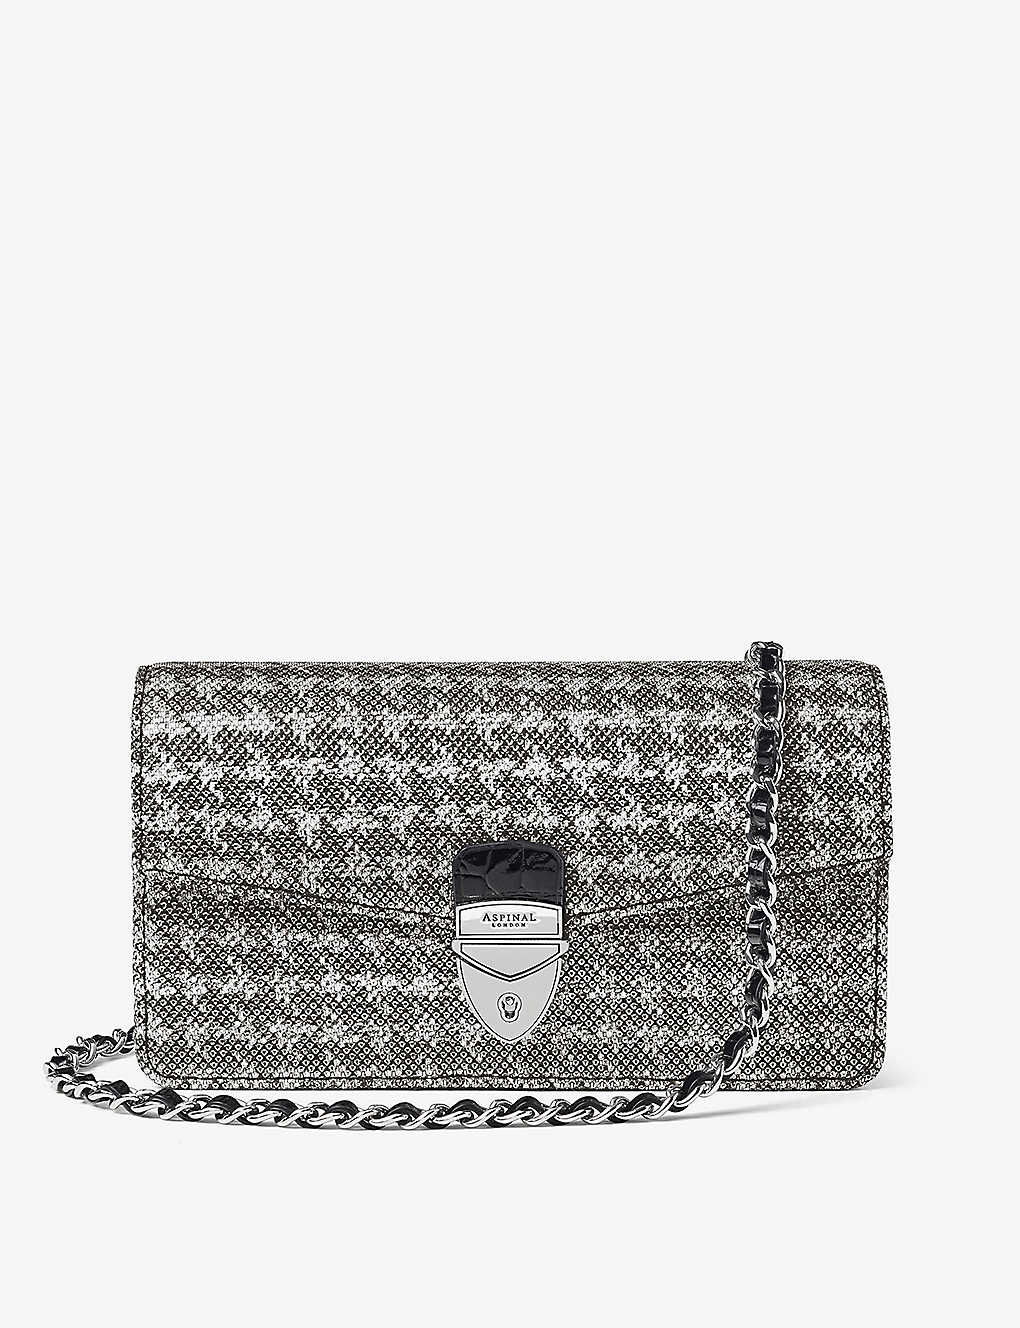 Aspinal Of London Mayfair Dogtooth Leather Clutch Bag In Black